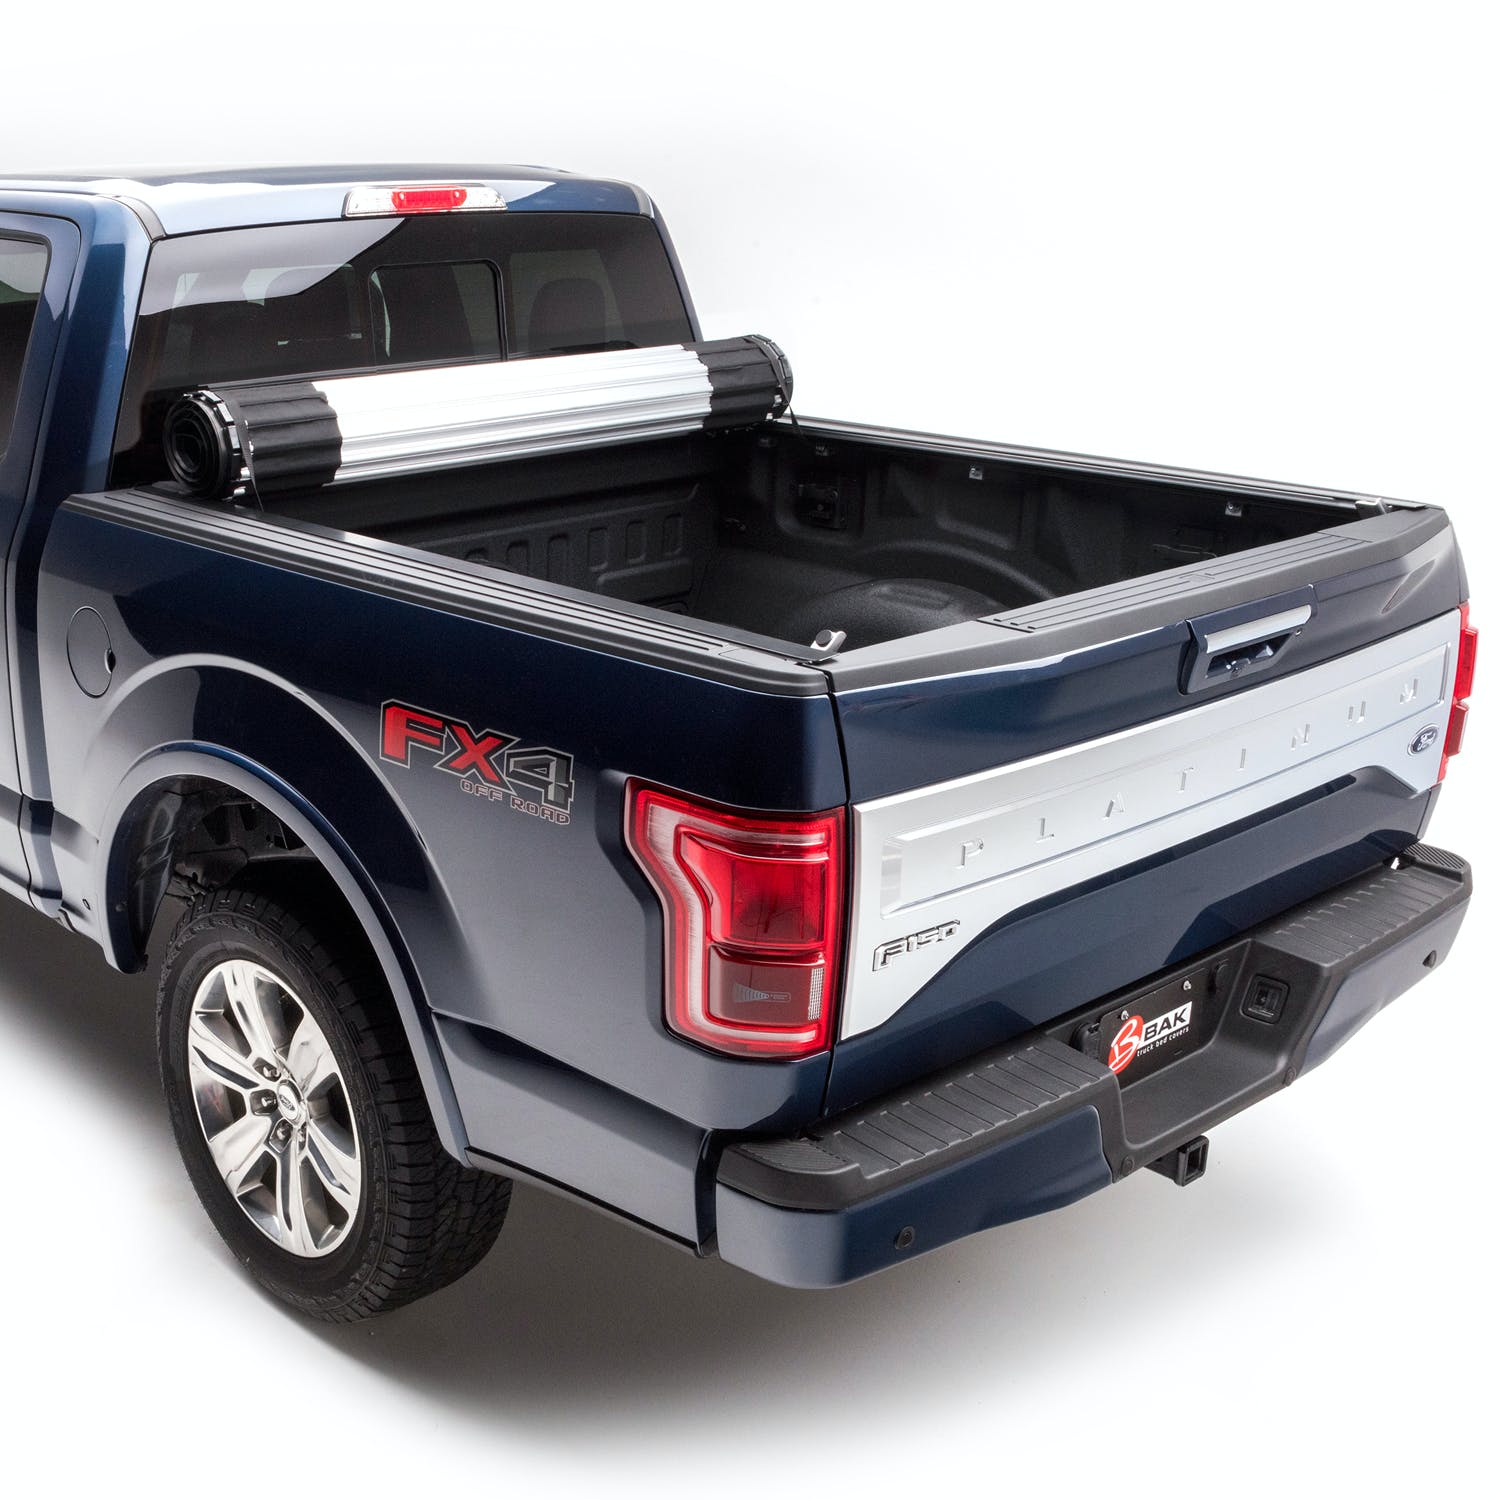 BAK Industries 39307 Revolver X2 Hard Rolling Truck Bed Cover